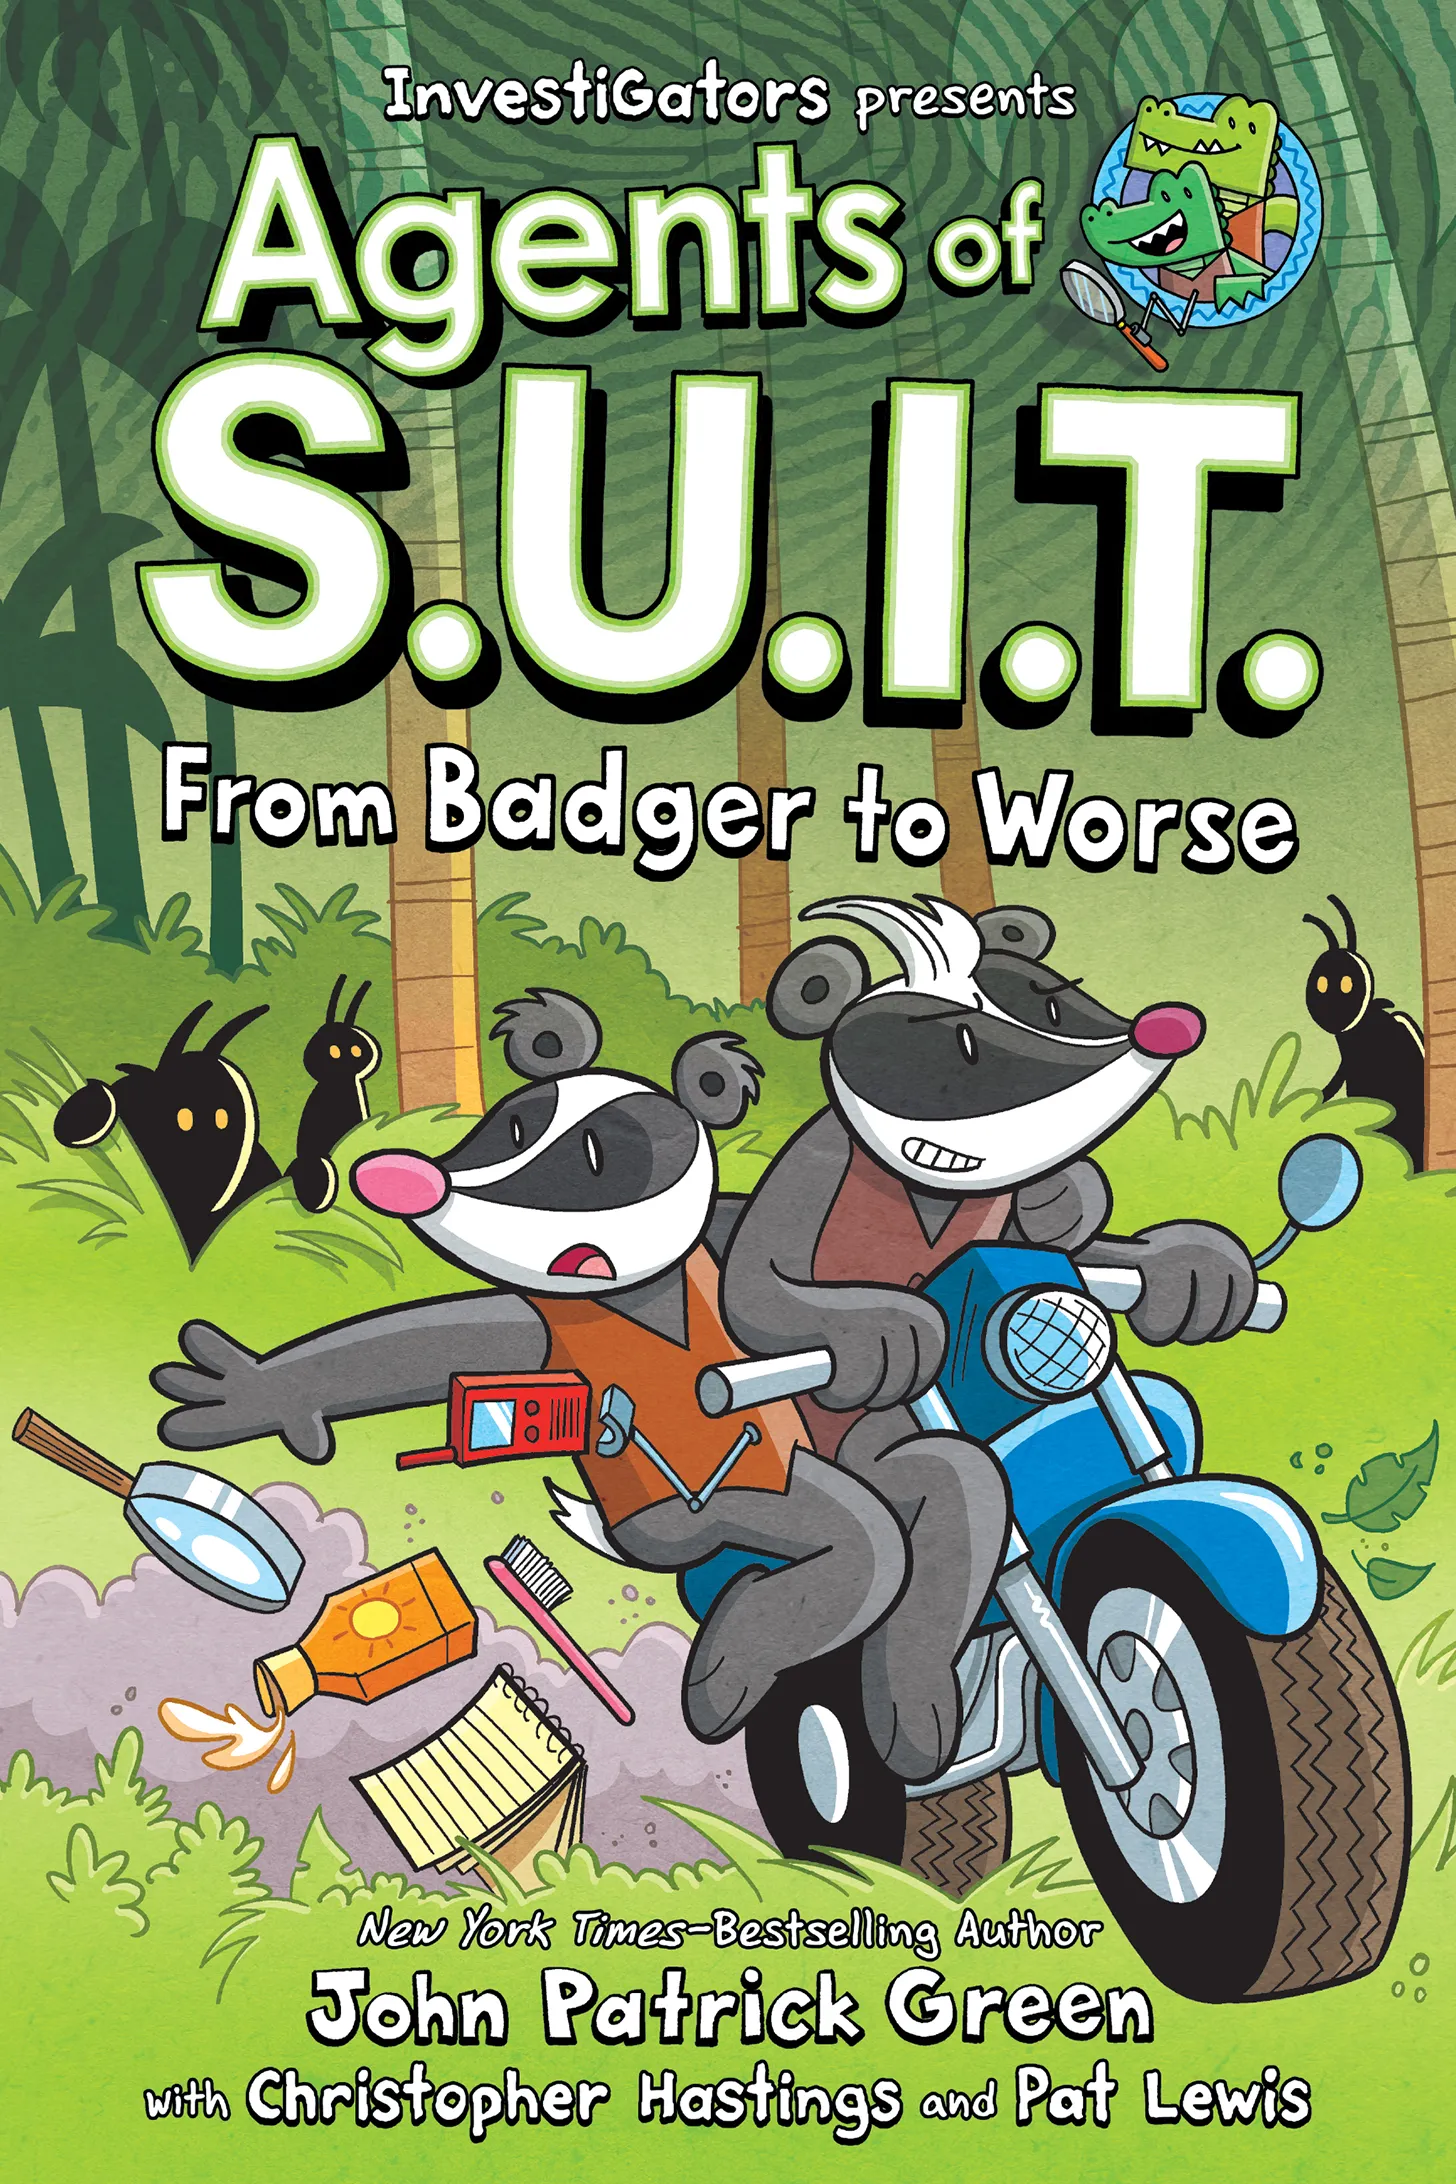 Agents of S.U.I.T.: From Badger to Worse (InvestiGators: Agents of S.U.I.T. #2)